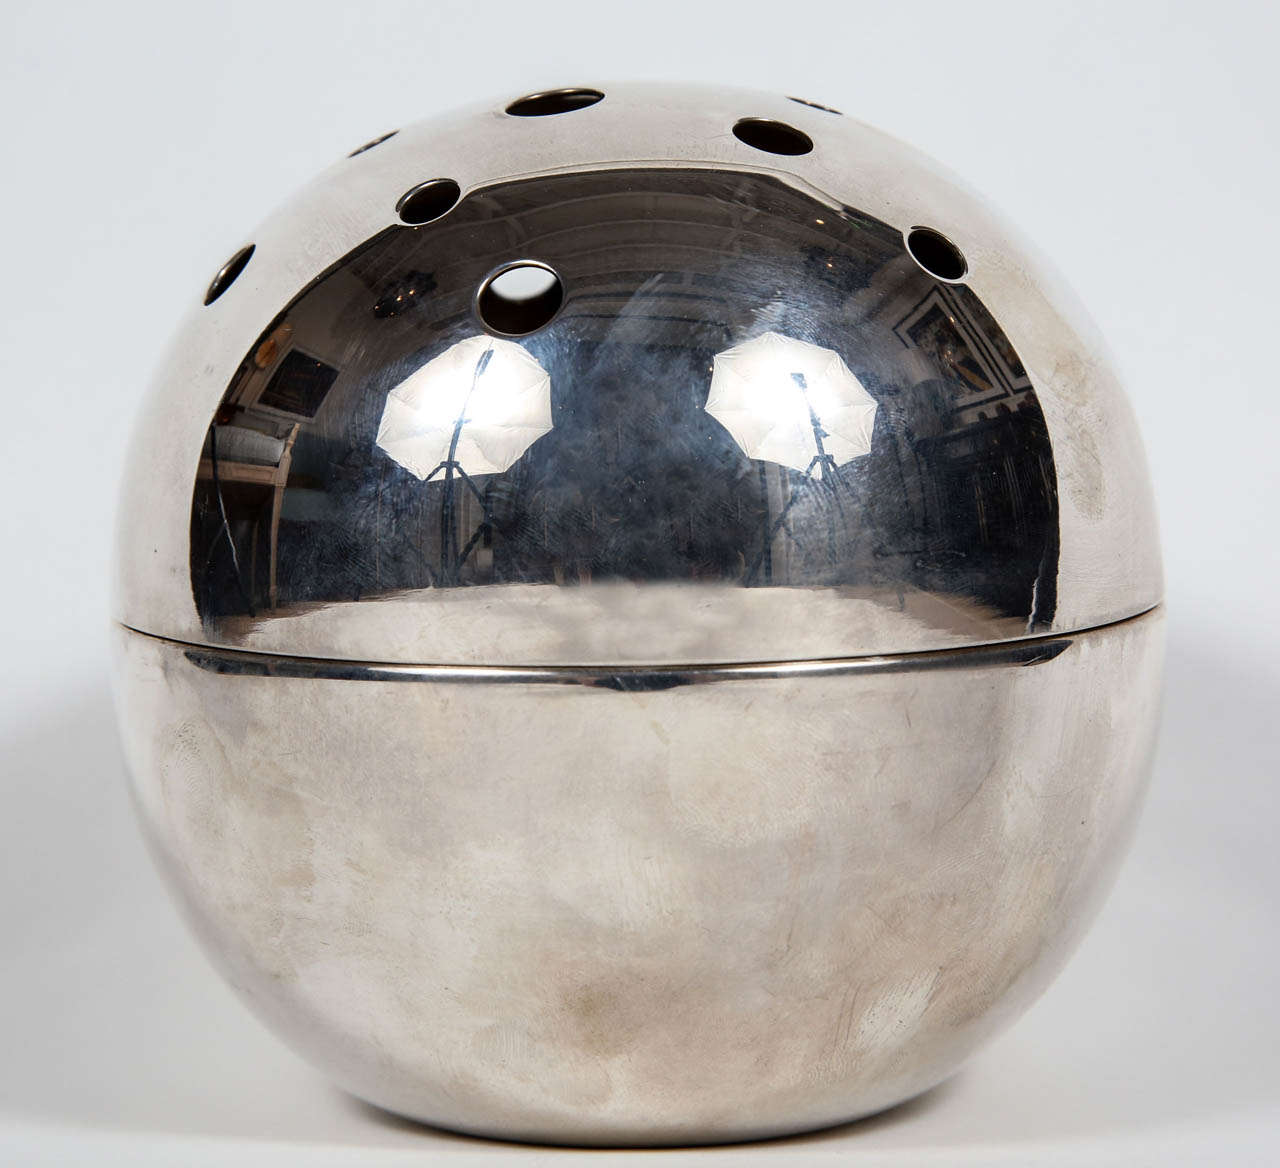 Spherical sterling silver bud vase by Christofle of Paris. Vase comes apart for easy care. Makers mark stamped on bottom. 

Christofle is a manufacturer of fine silver flatware and home accessories based in France. It was founded in 1830 by